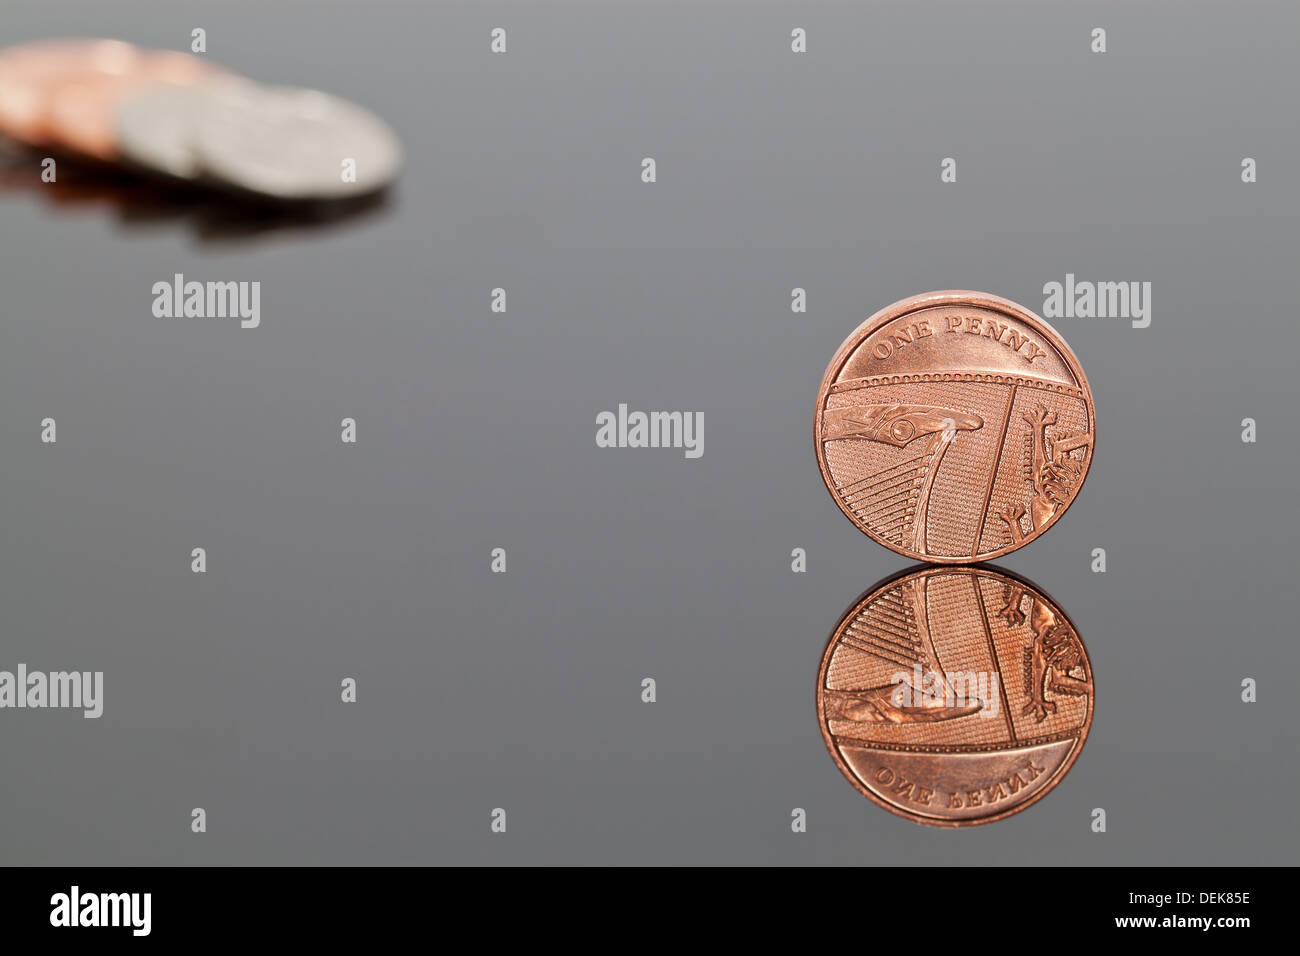 A Shiny One Pence Coin - UK Penny Stock Photo